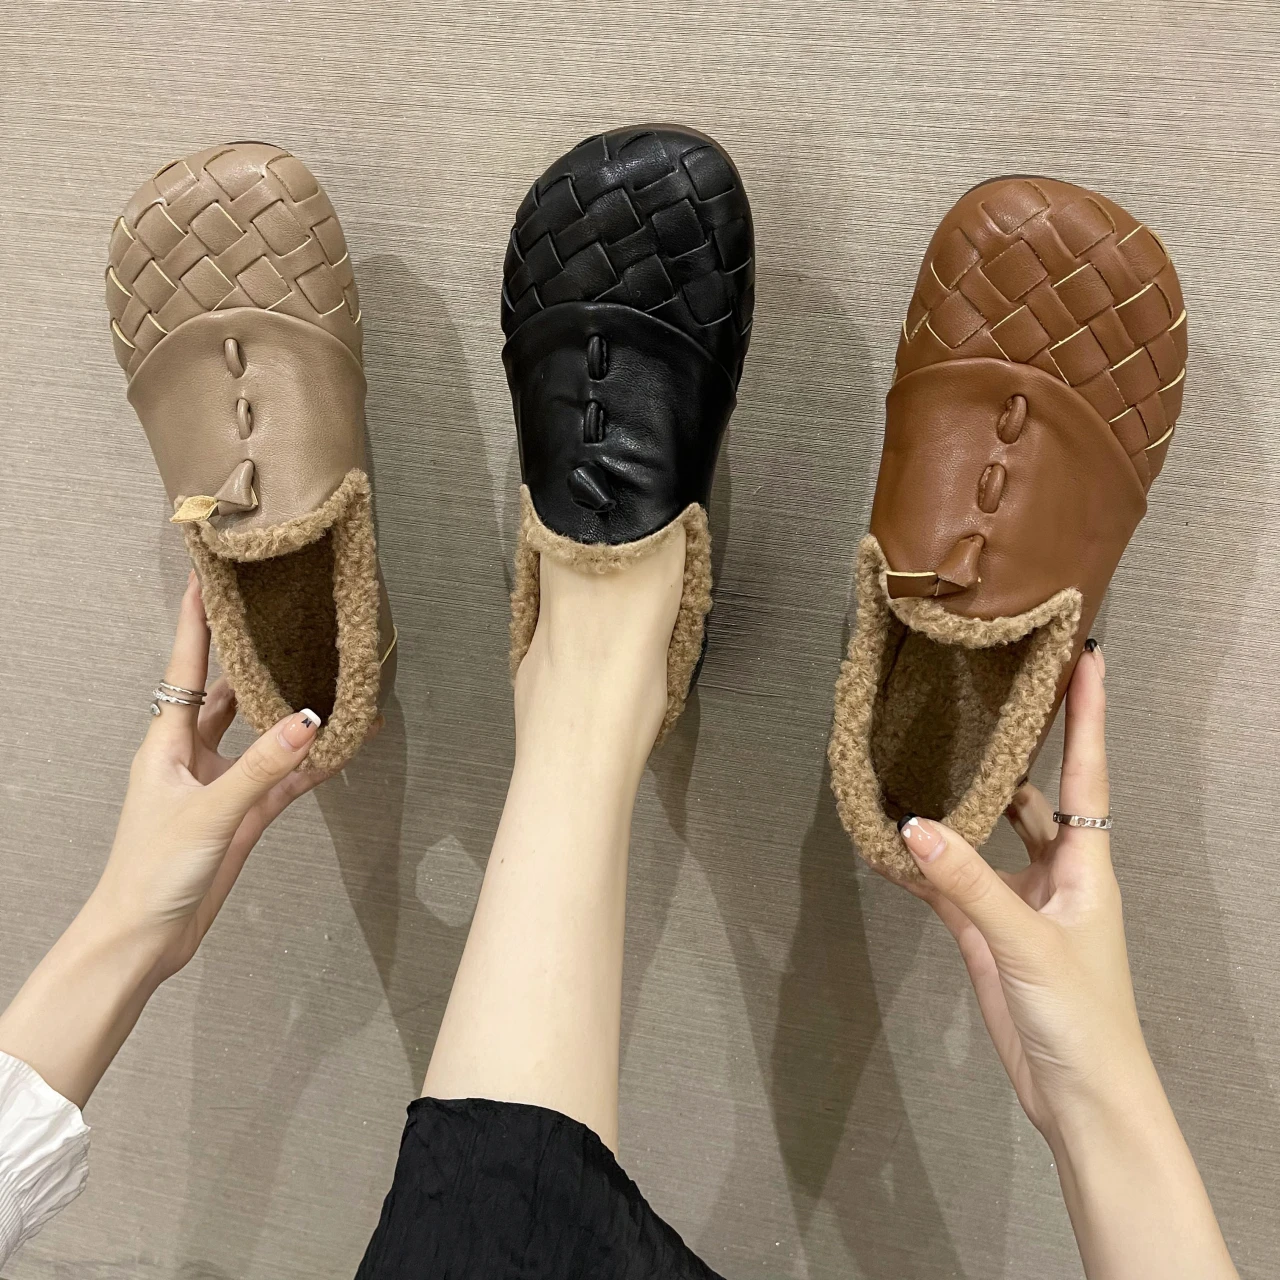 

Shoes Woman 2022 Shallow Mouth Round Toe Female Footwear Casual Sneaker Slip-on Loafers Fur New Moccasin Grandma Winter Dress Sl